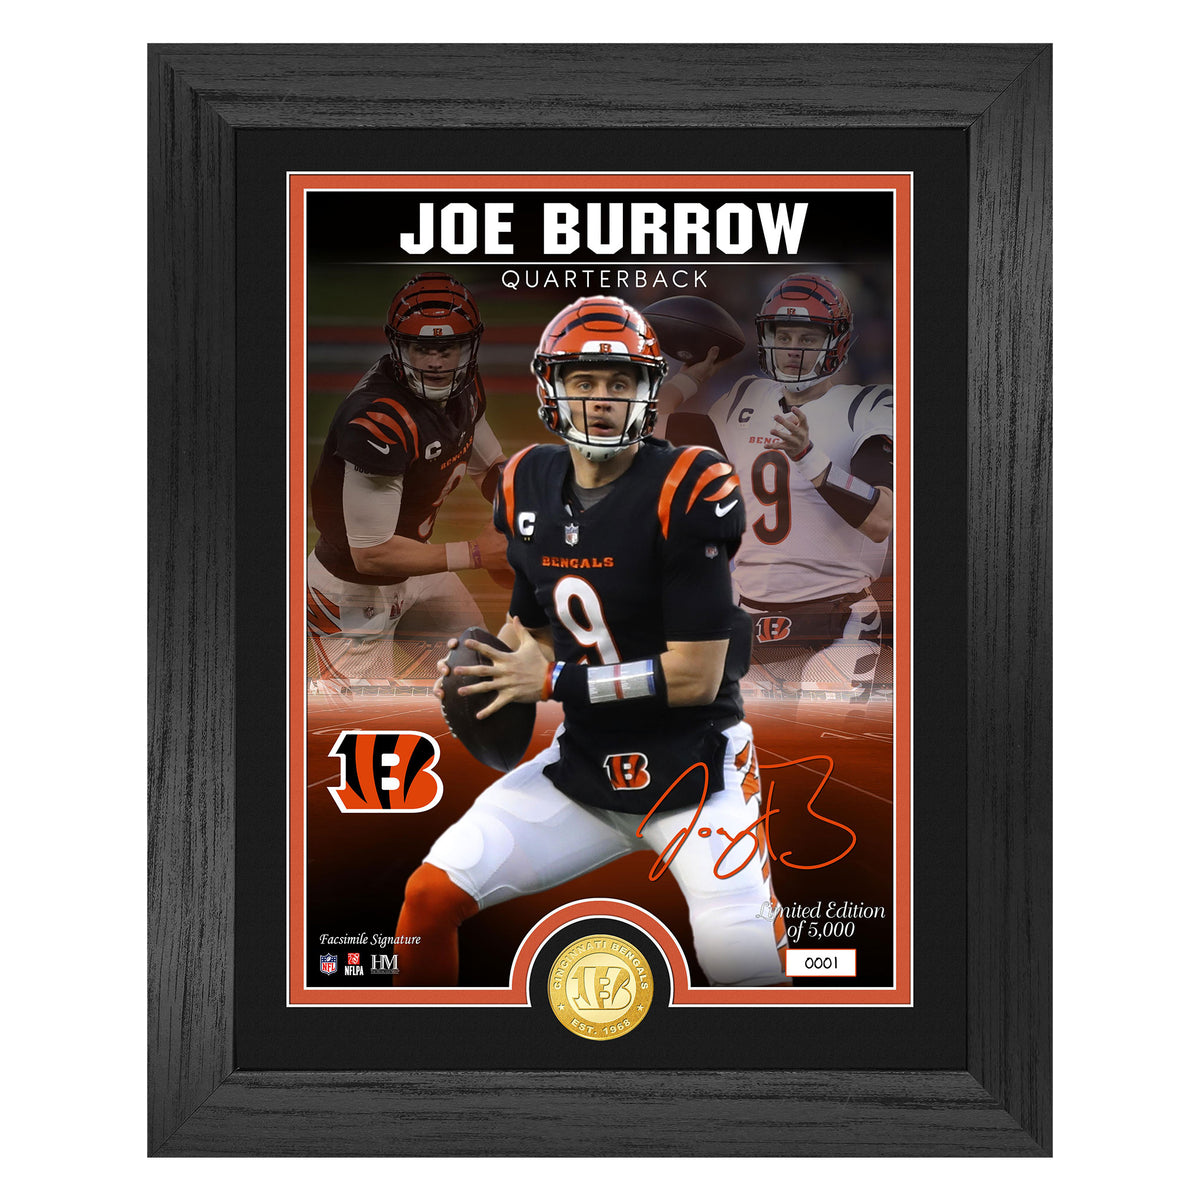 Joe Burrow (Bengals) Player Coin in Framed Photo